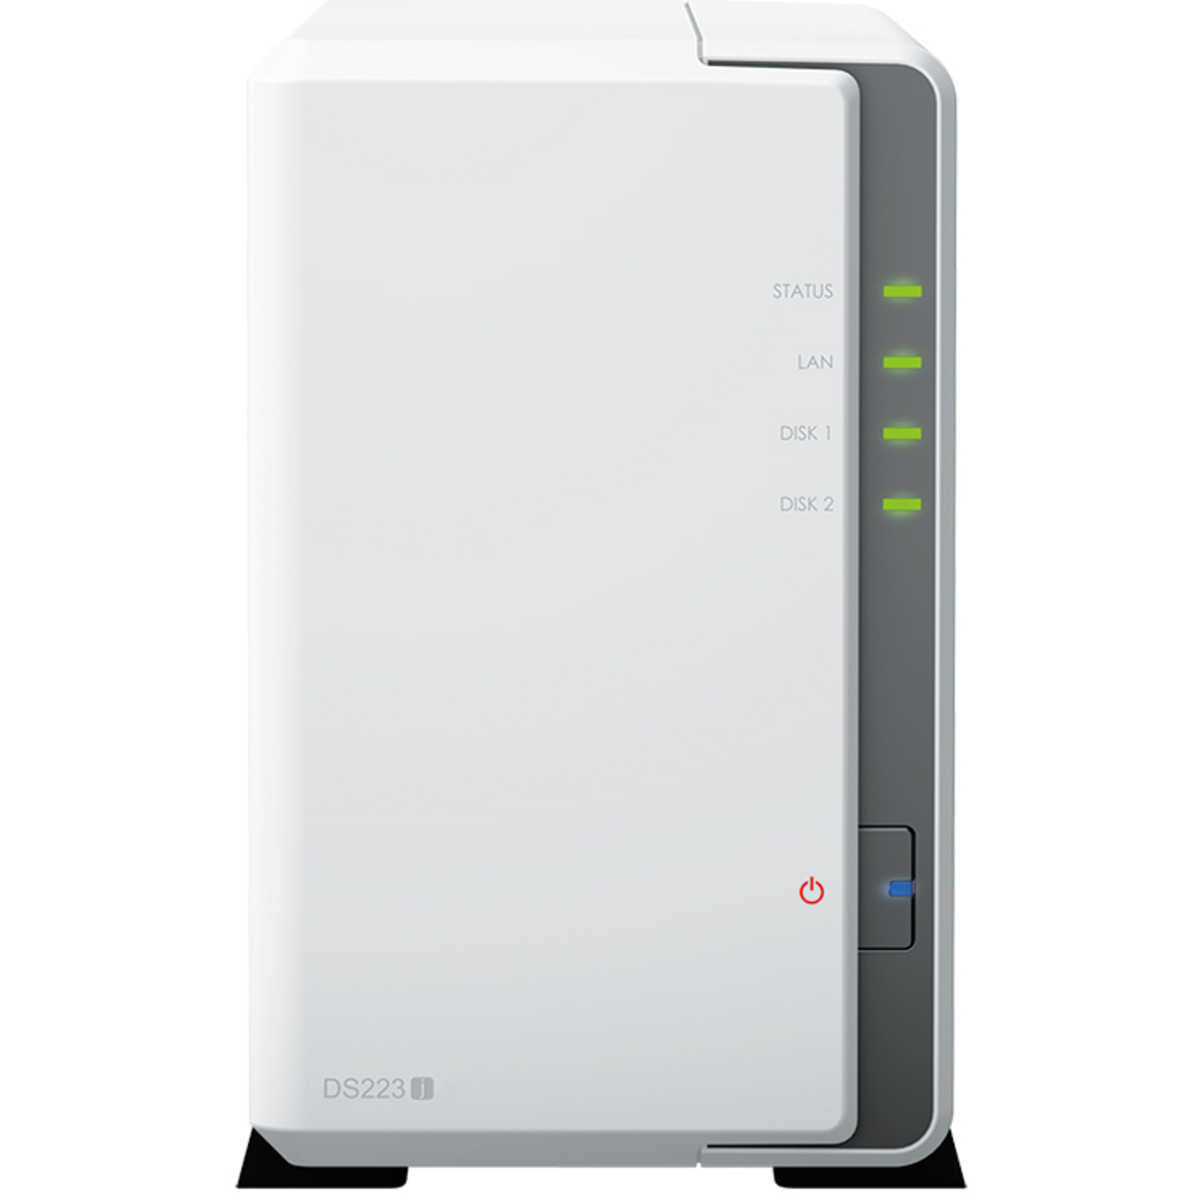 Synology DiskStation DS223j Desktop 2-Bay Personal / Basic Home / Small Office NAS - Network Attached Storage Device Burn-In Tested Configurations DiskStation DS223j